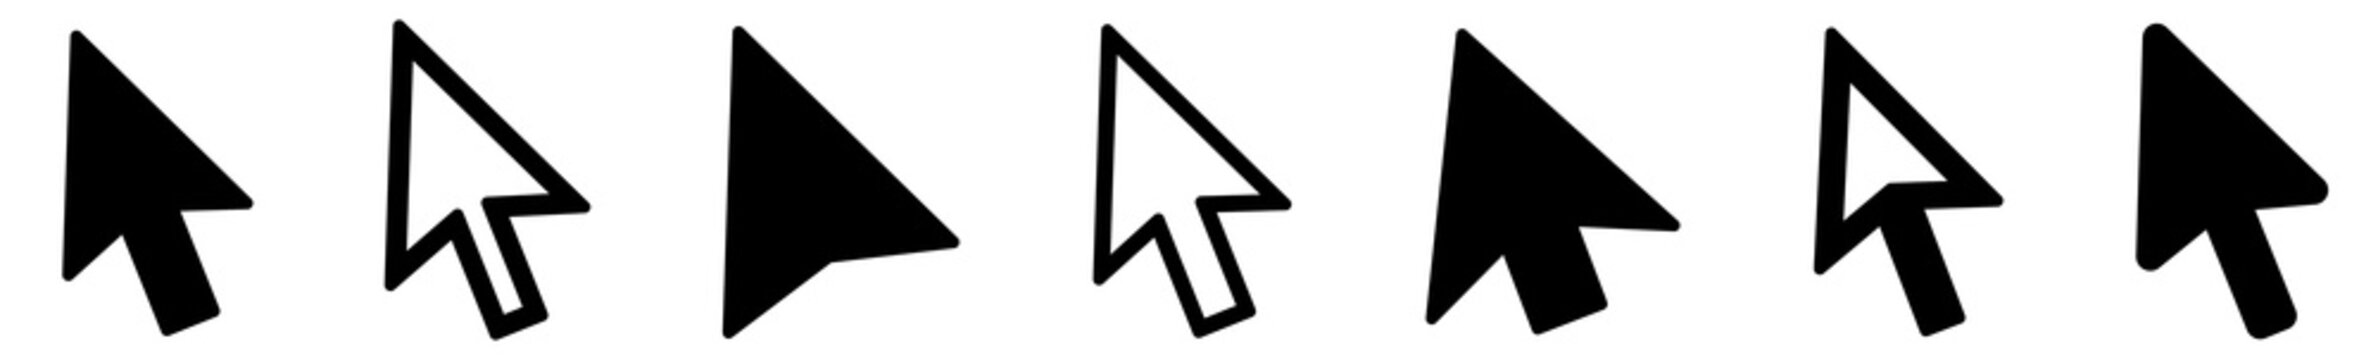 Cursor | Mouse Arrow Icon | Computer Mouse Pointer | Click Variations